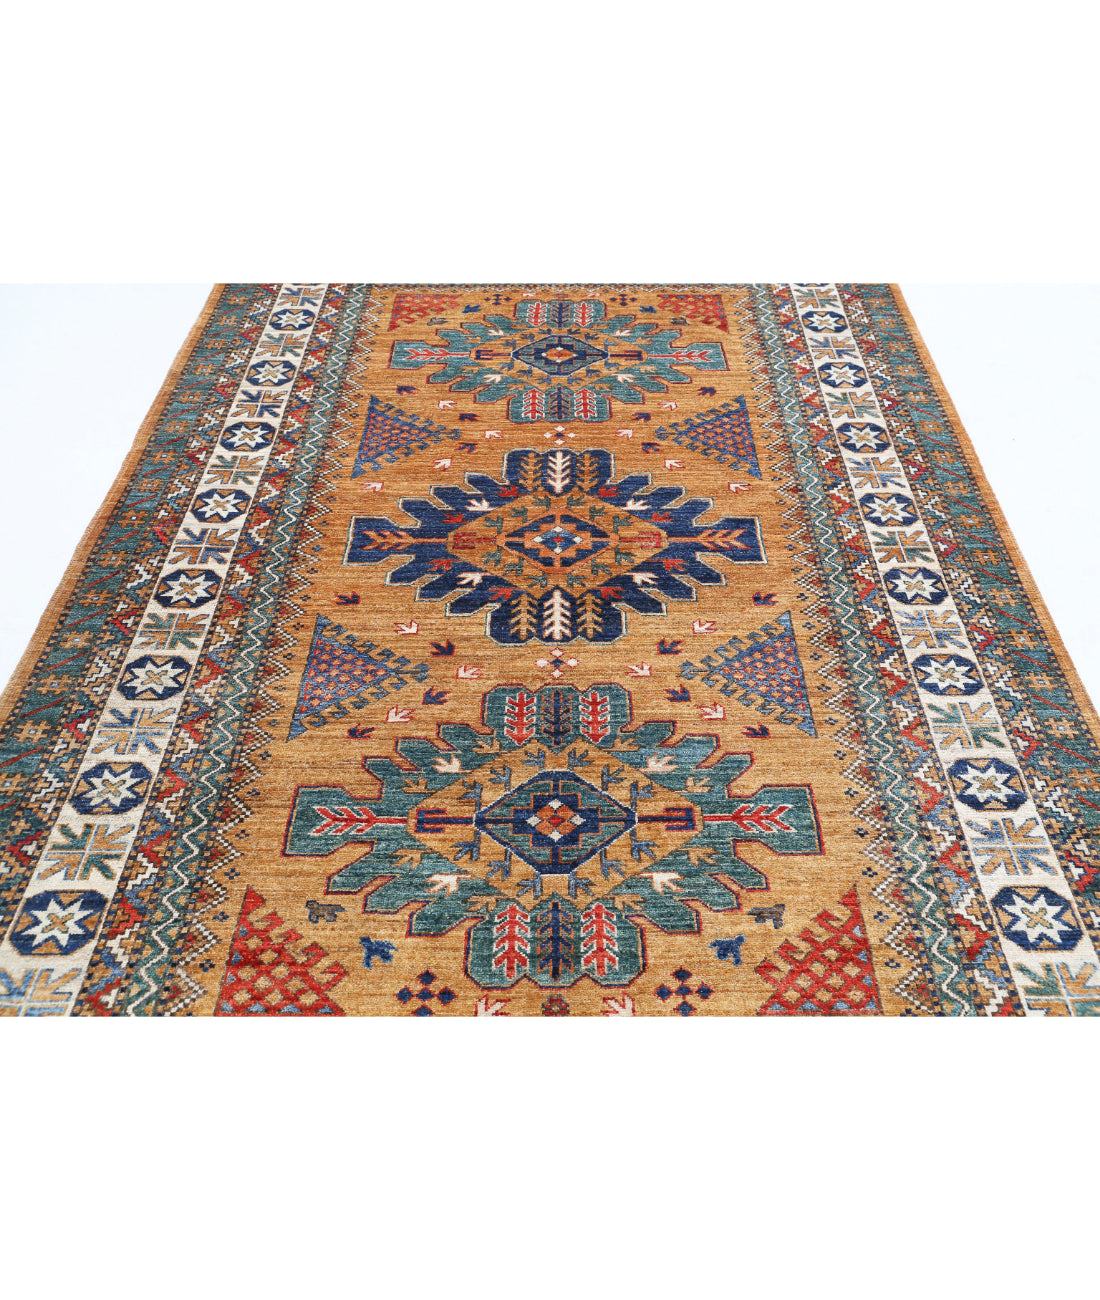 Hand Knotted Nomadic Caucasian Humna Wool Rug - 5'11'' x 9'0'' 5'11'' x 9'0'' (178 X 270) / Gold / Ivory